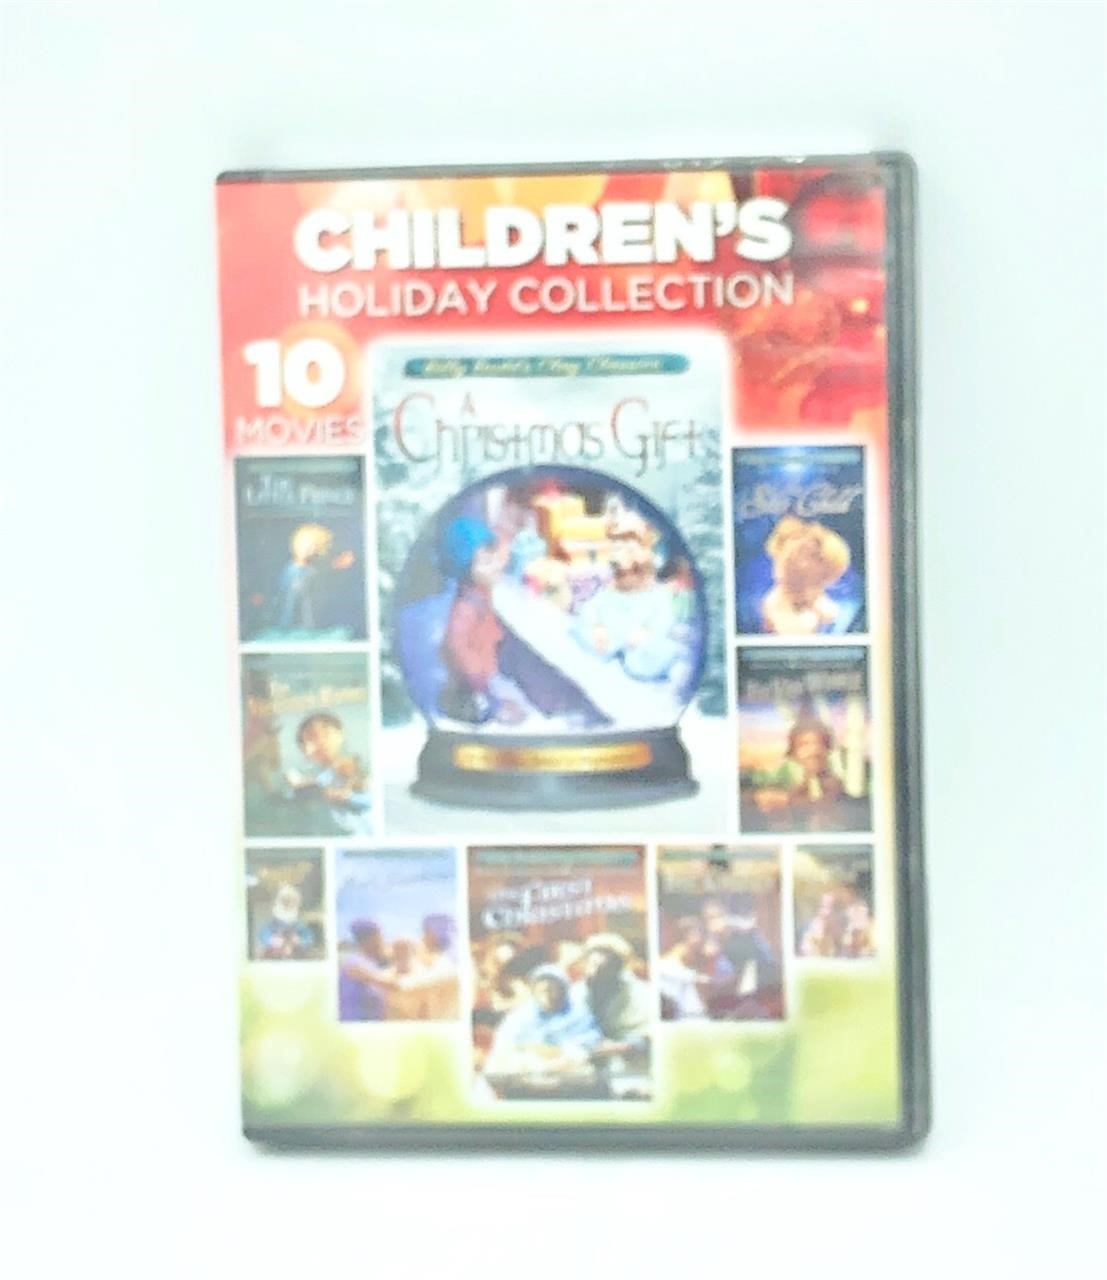 Children’s Holiday Collection 10 movies